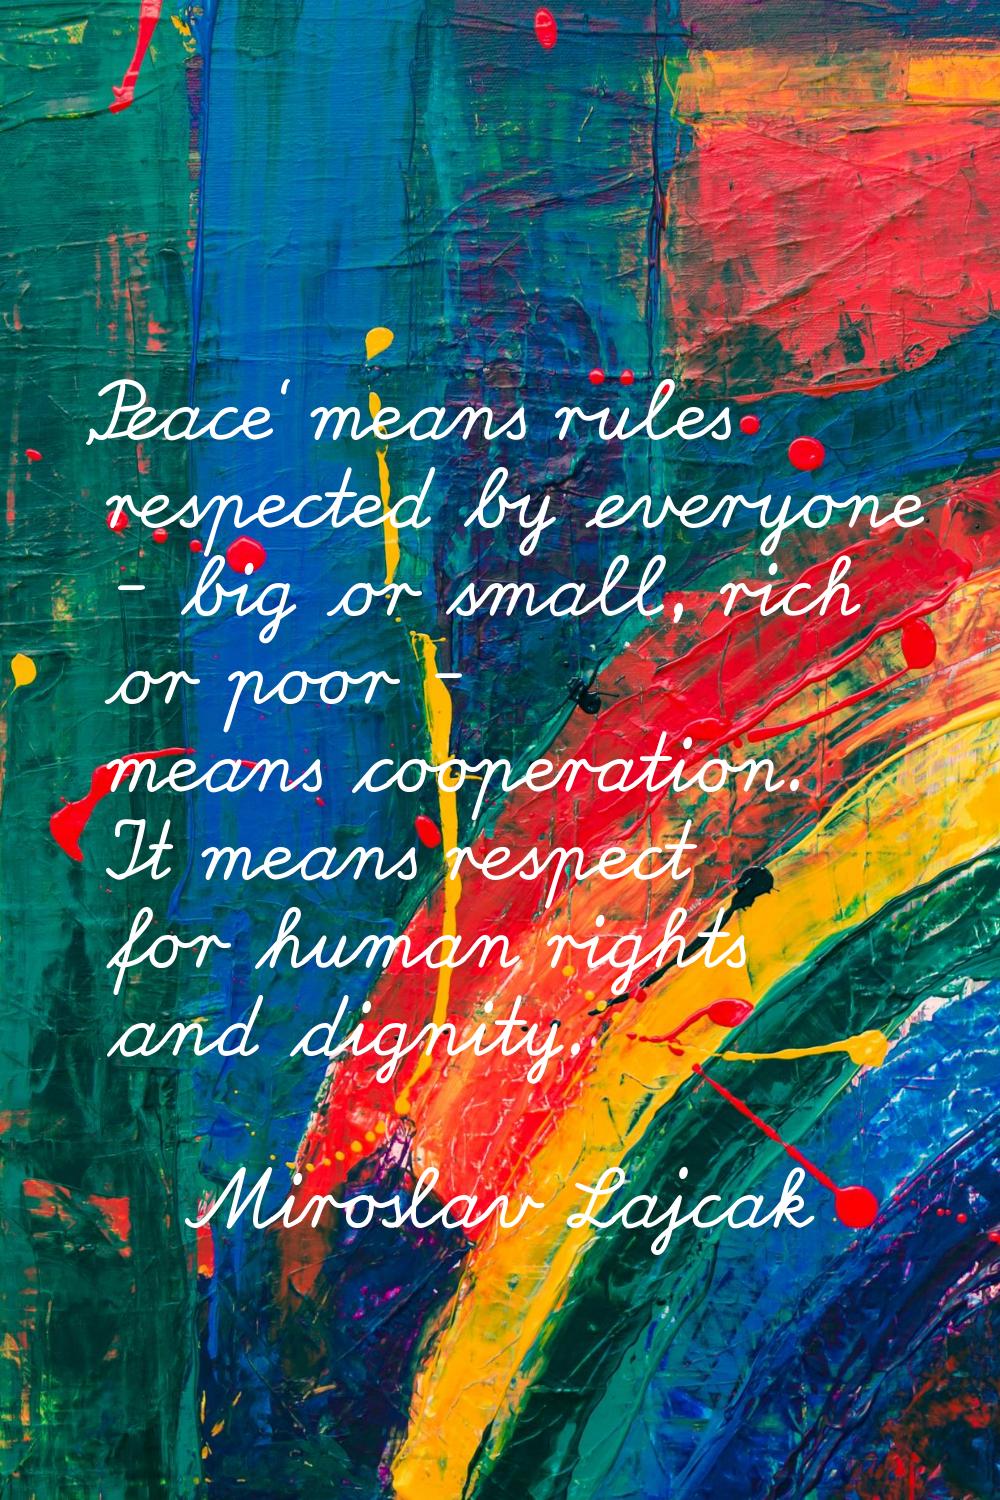 'Peace' means rules respected by everyone - big or small, rich or poor - means cooperation. It mean